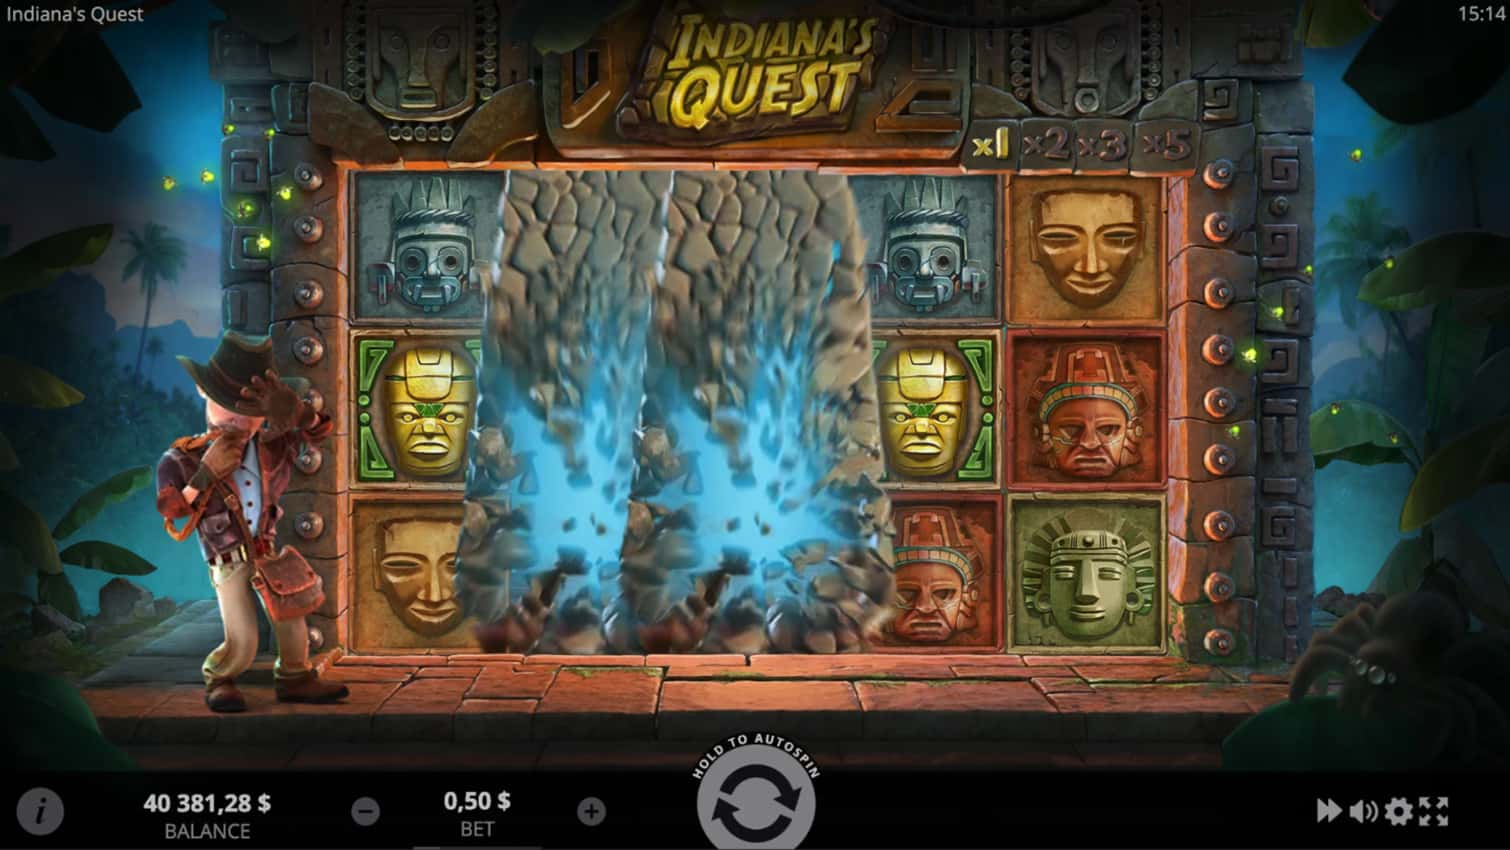 INDIANA’S QUEST PG Slot โปรโมชั่น